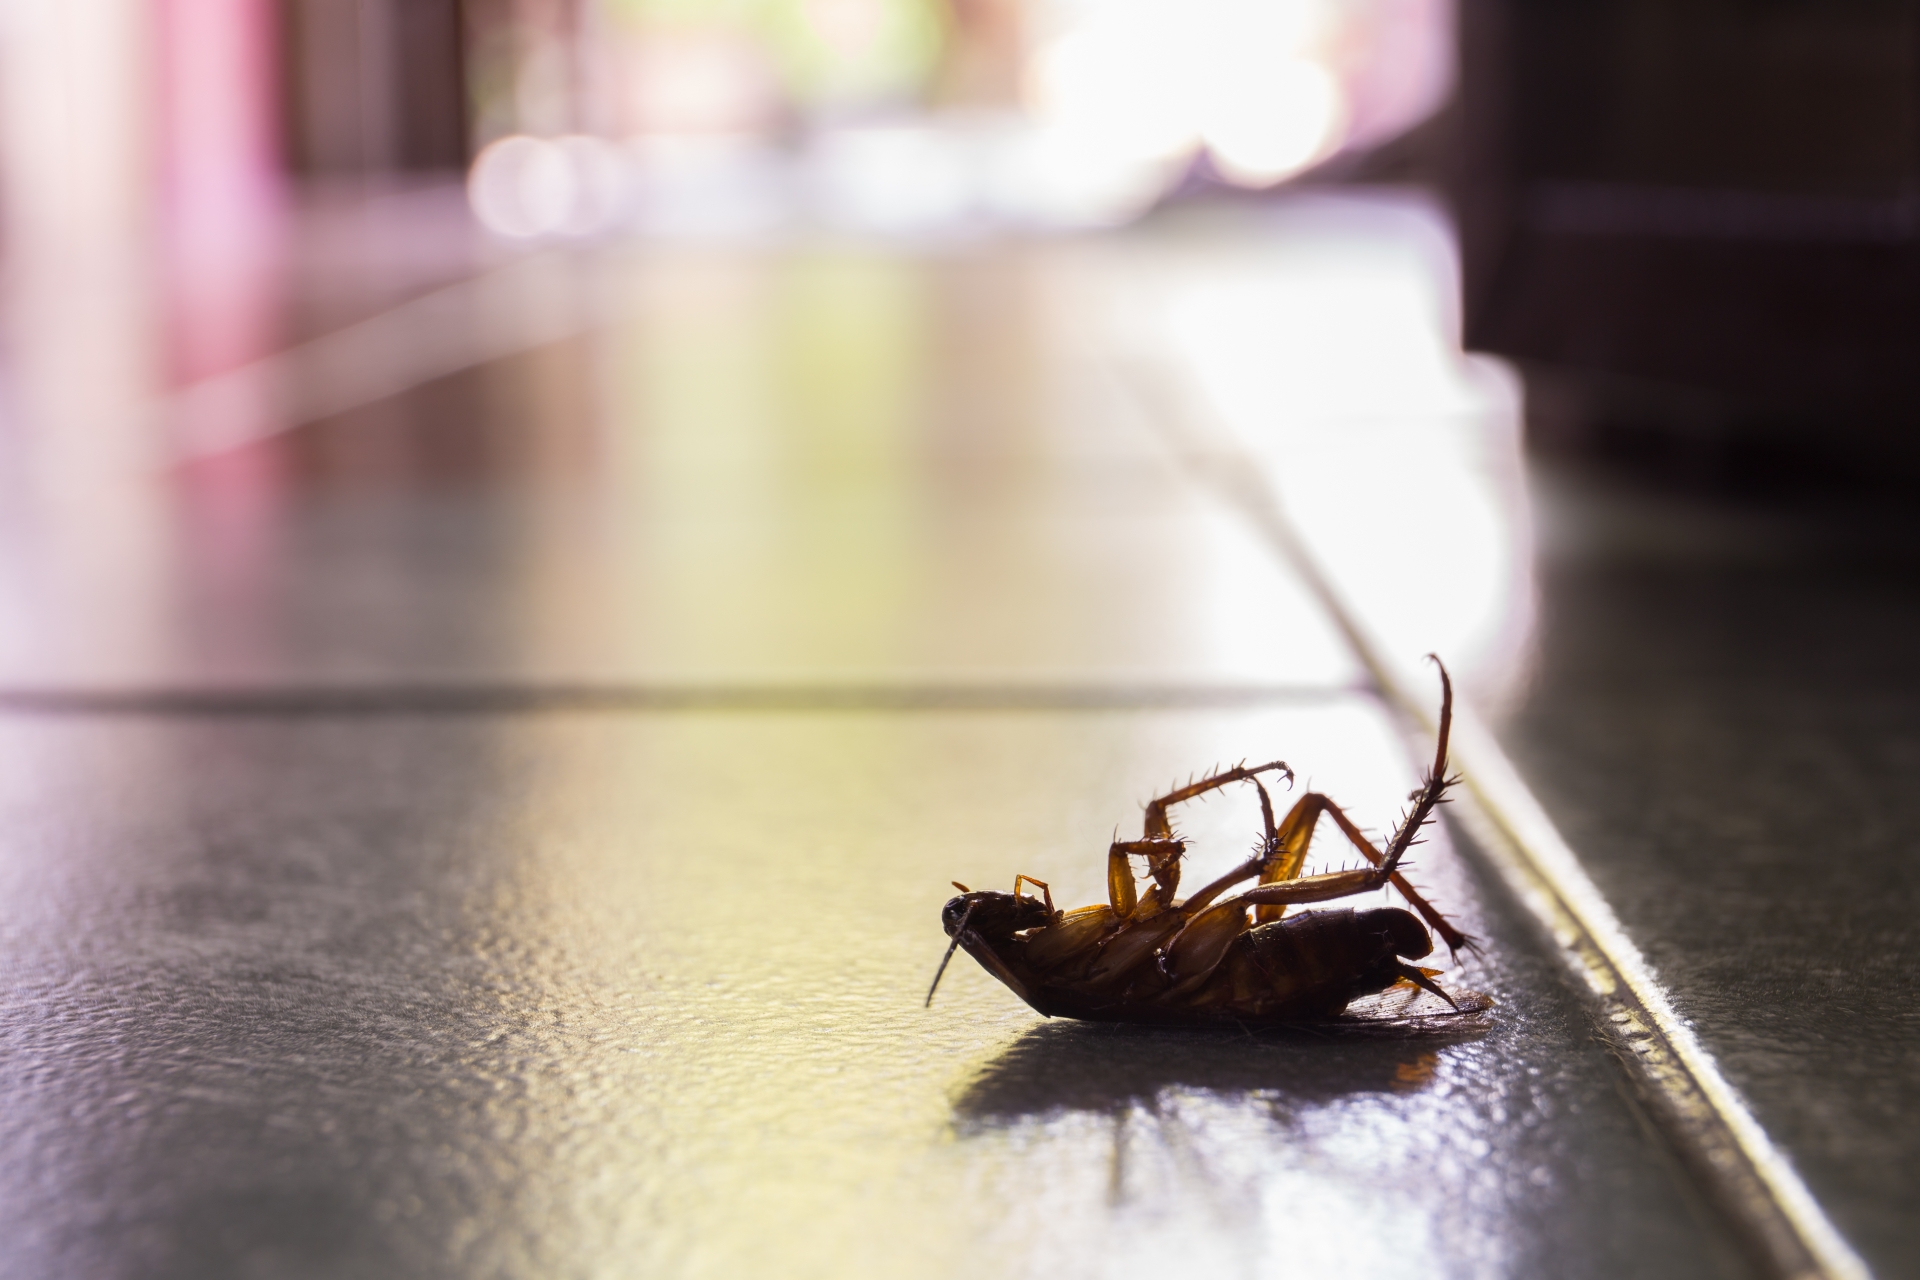 Cockroach Control, Pest Control in Walton-on-Thames, Hersham, KT12. Call Now 020 8166 9746